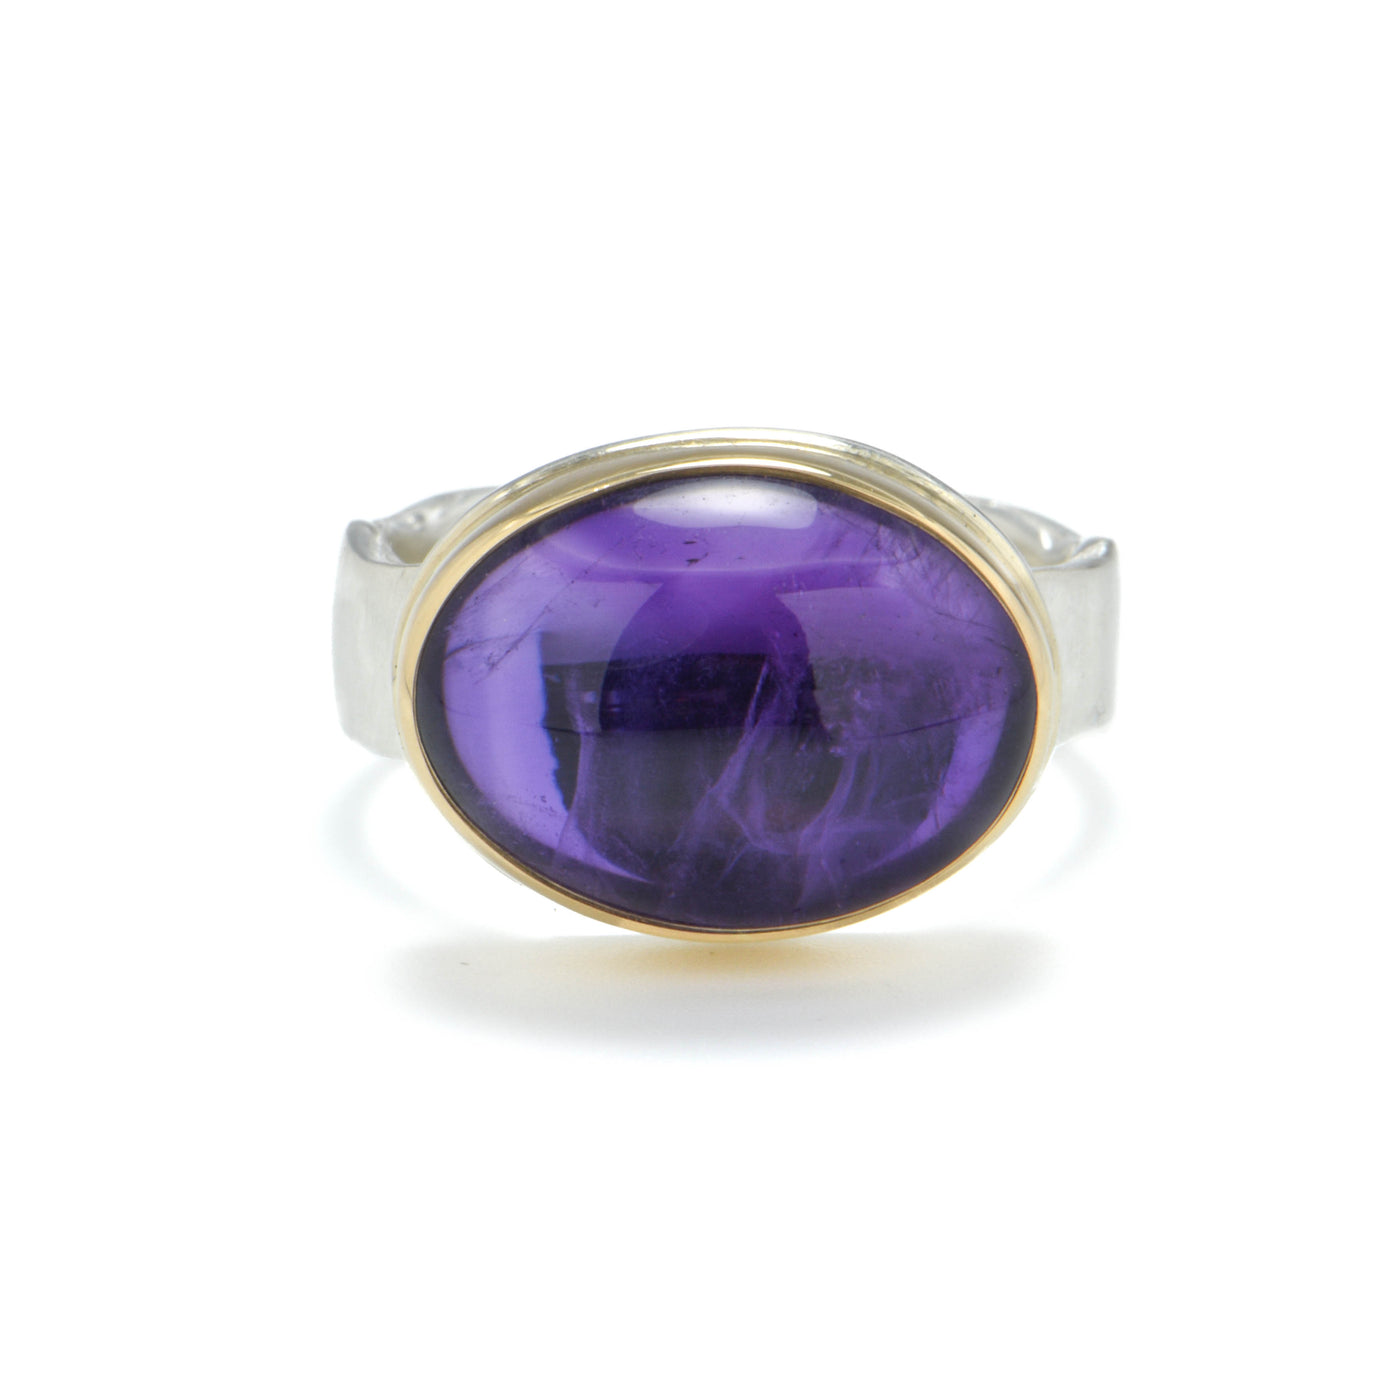 Small Oval Cabochon Amethyst Ring